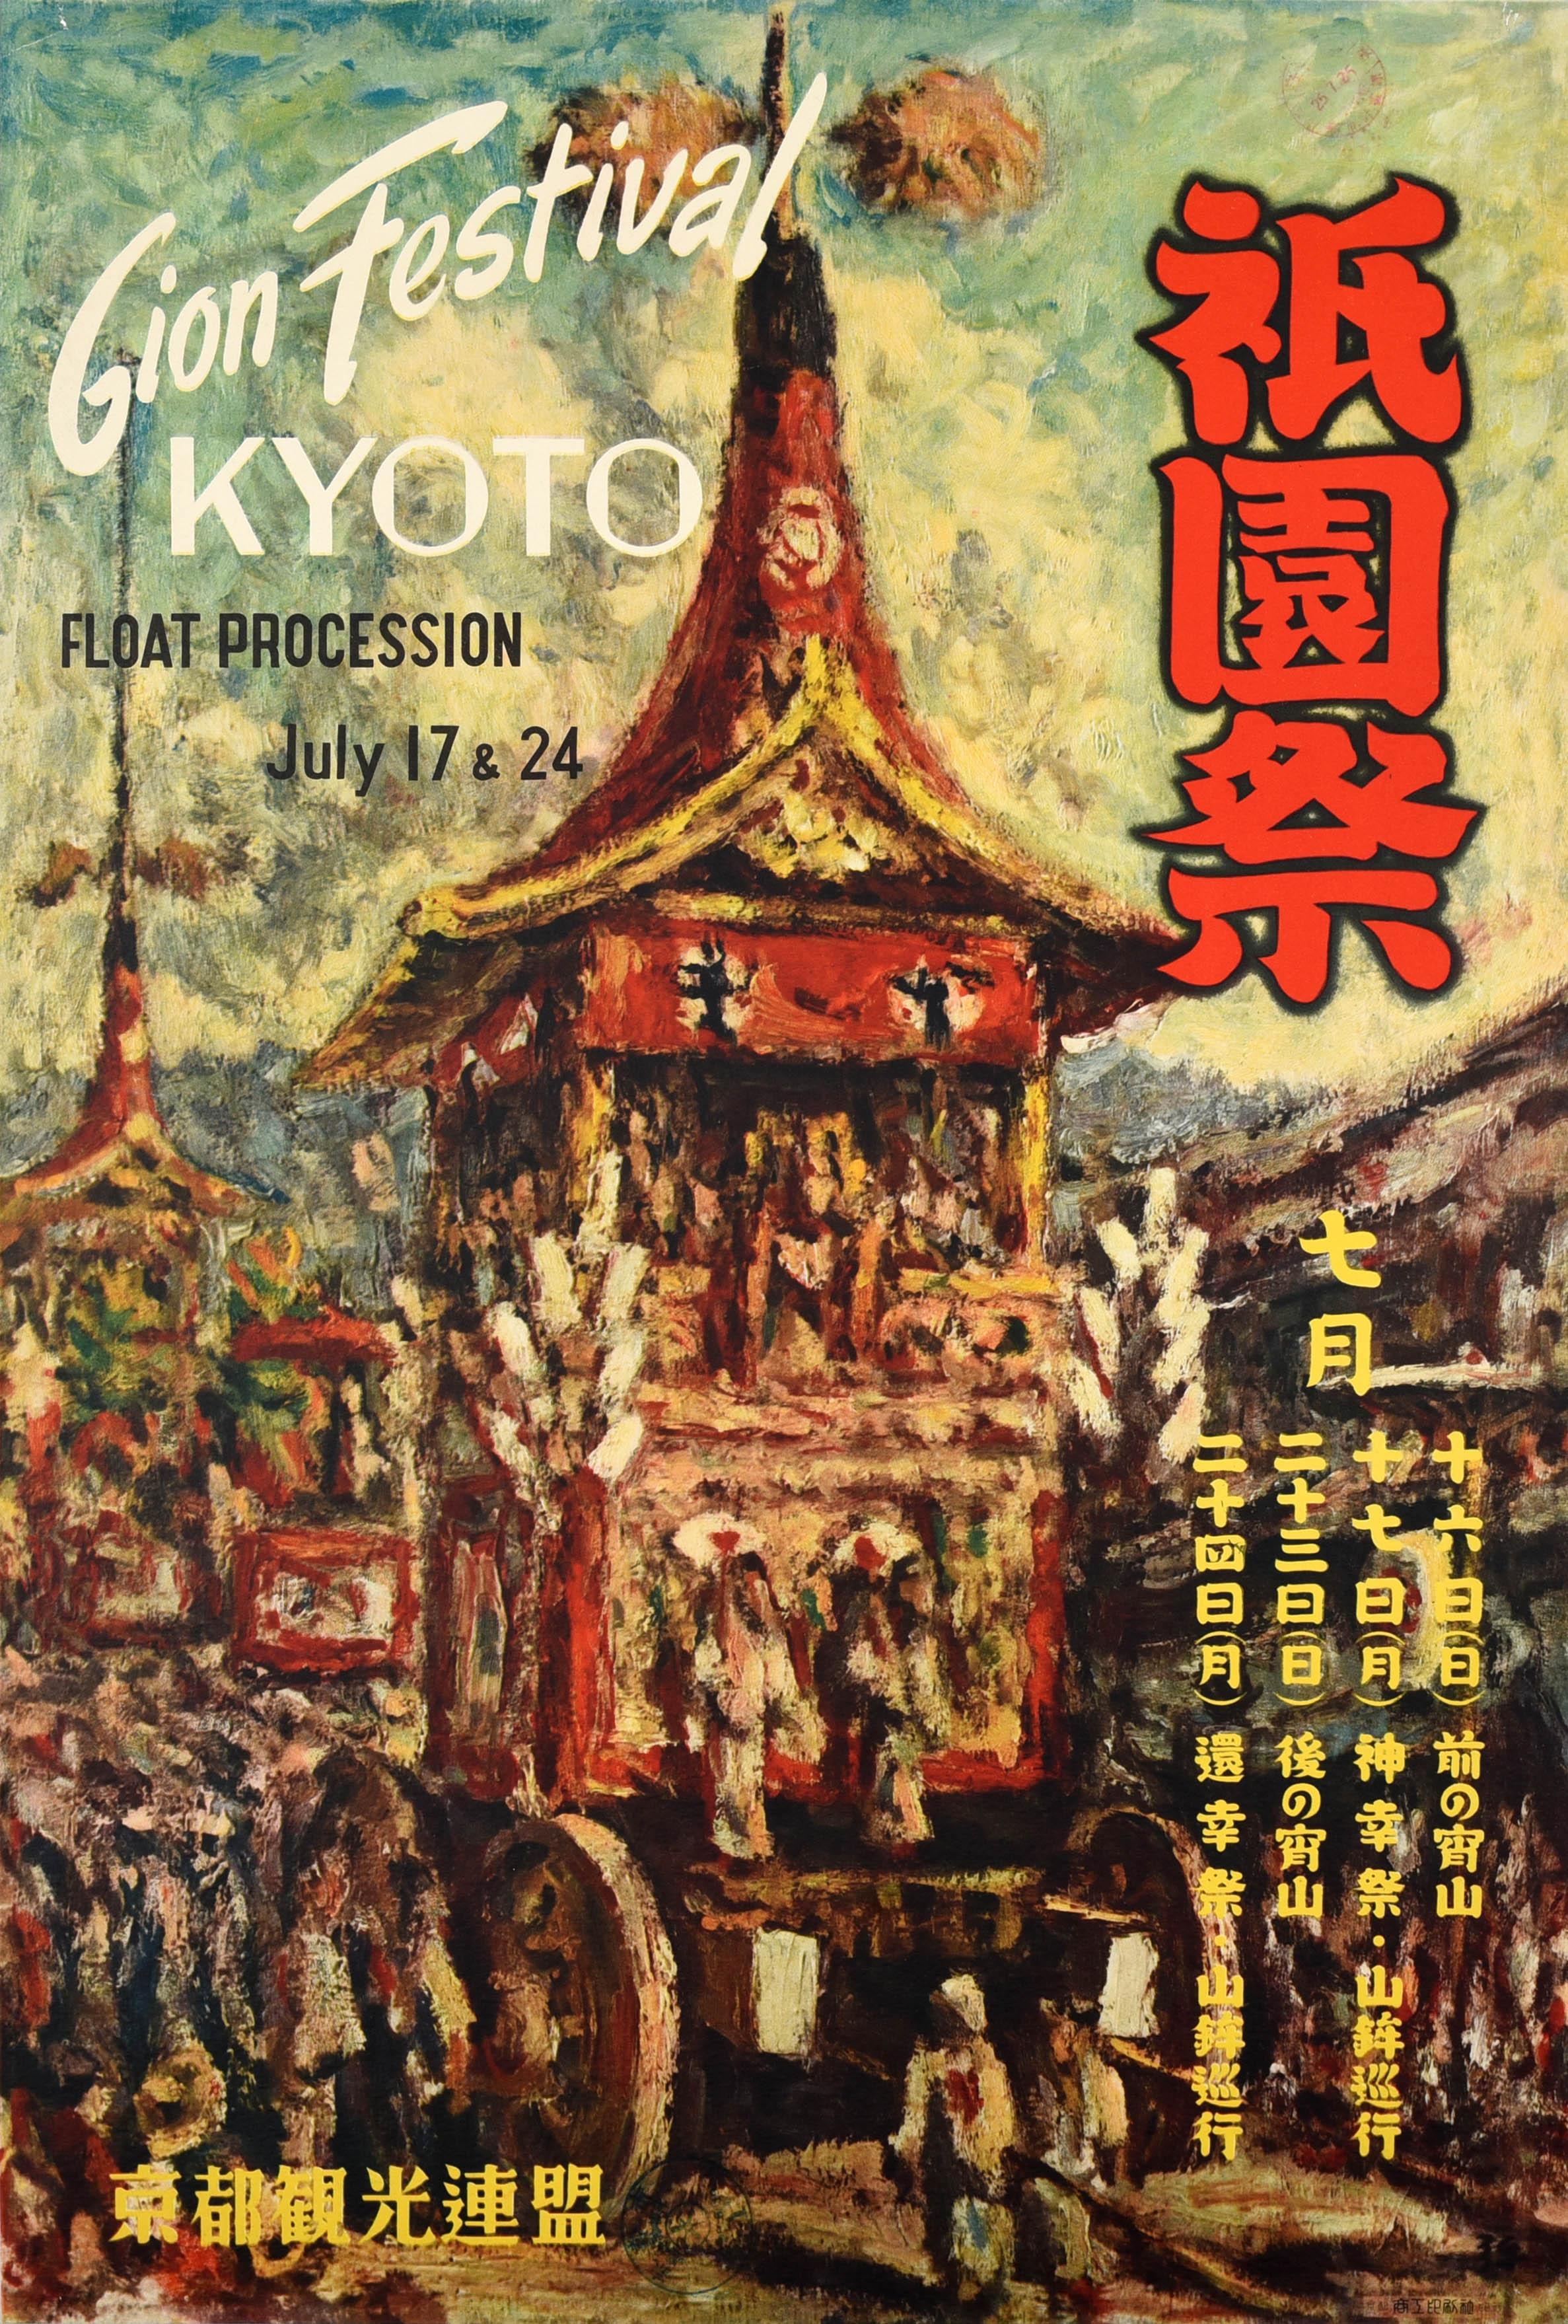 Unknown Print - Original Vintage Asia Travel Poster Gion Festival Kyoto Float Procession Japan